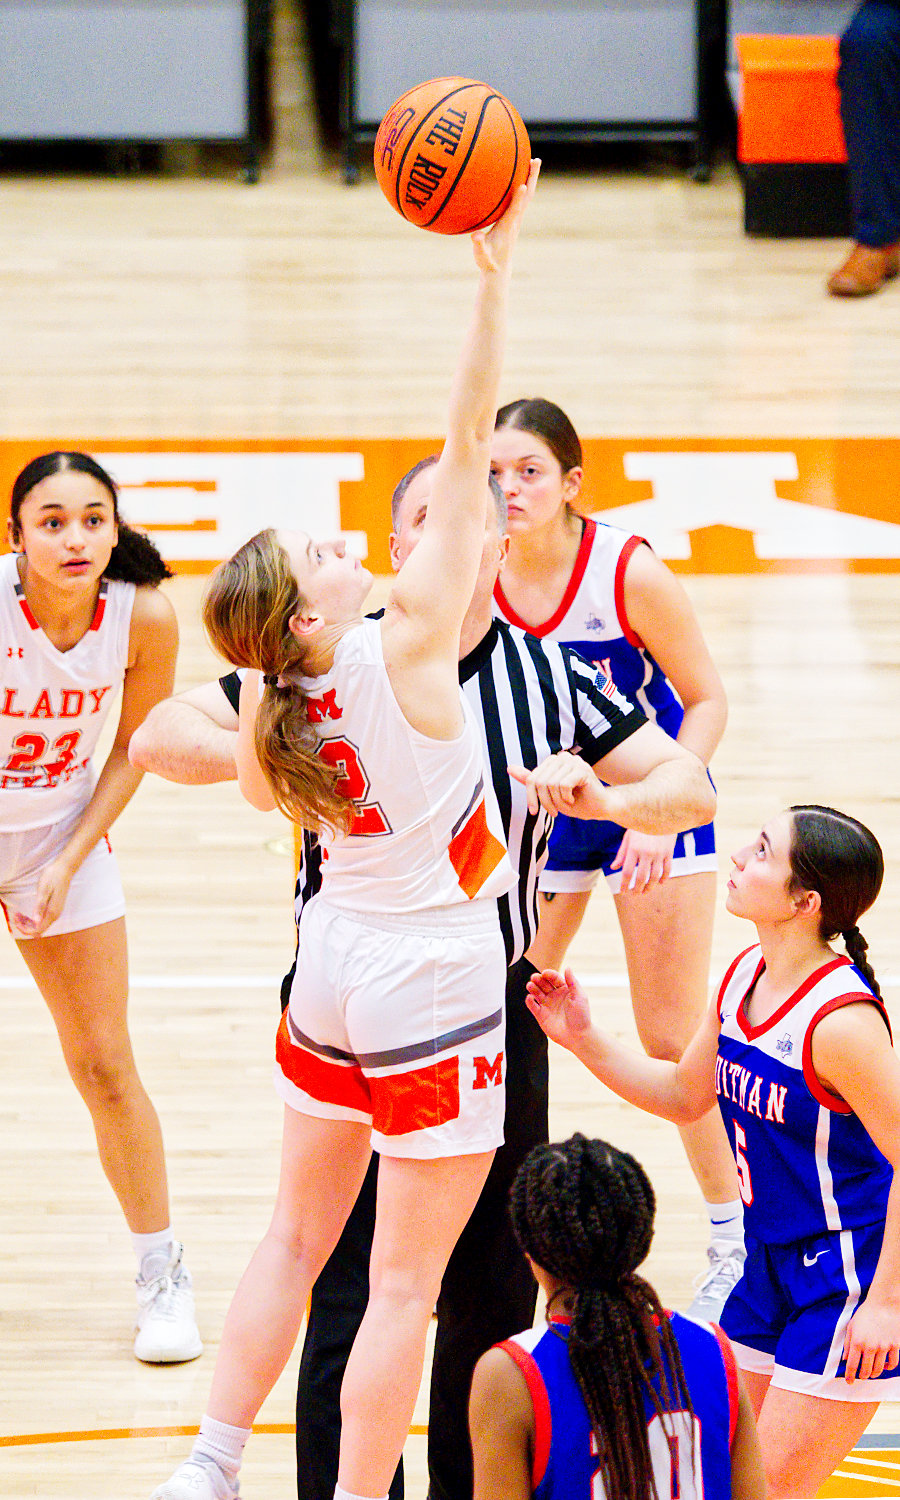 Mineola exploited every advantage at their disposal to dispatch Quitman, from the very start, where forward Mylee Fischer claimed the tip-off uncontested. [see more shots, buy basketball photos]